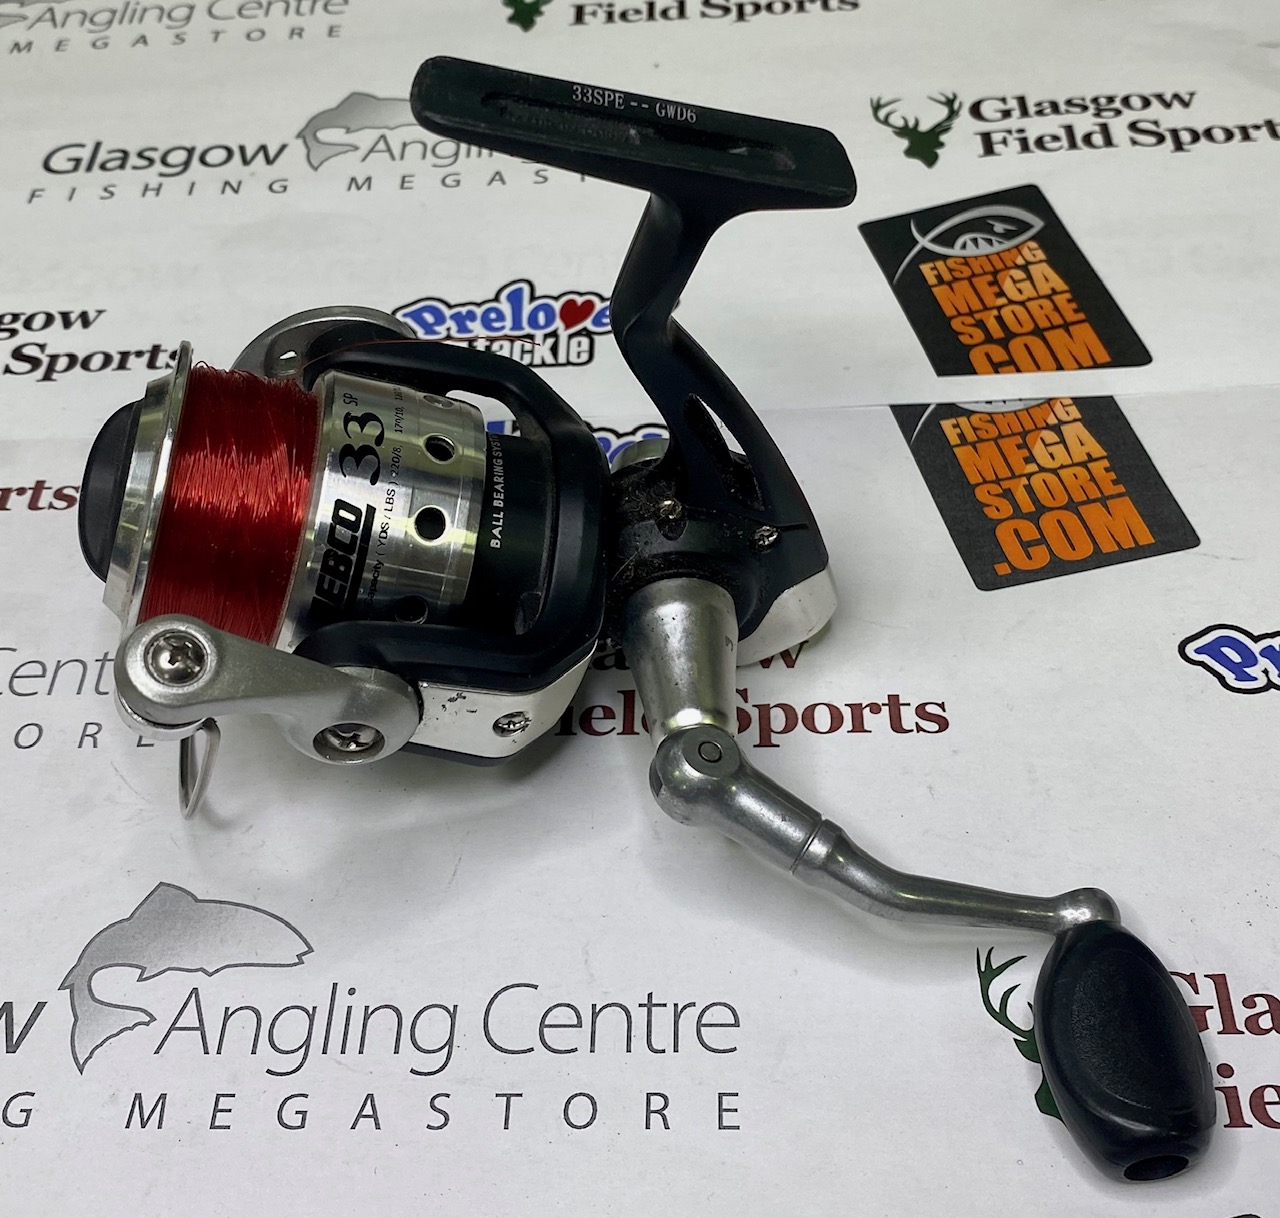 33sp Front drag spinning reel - Used